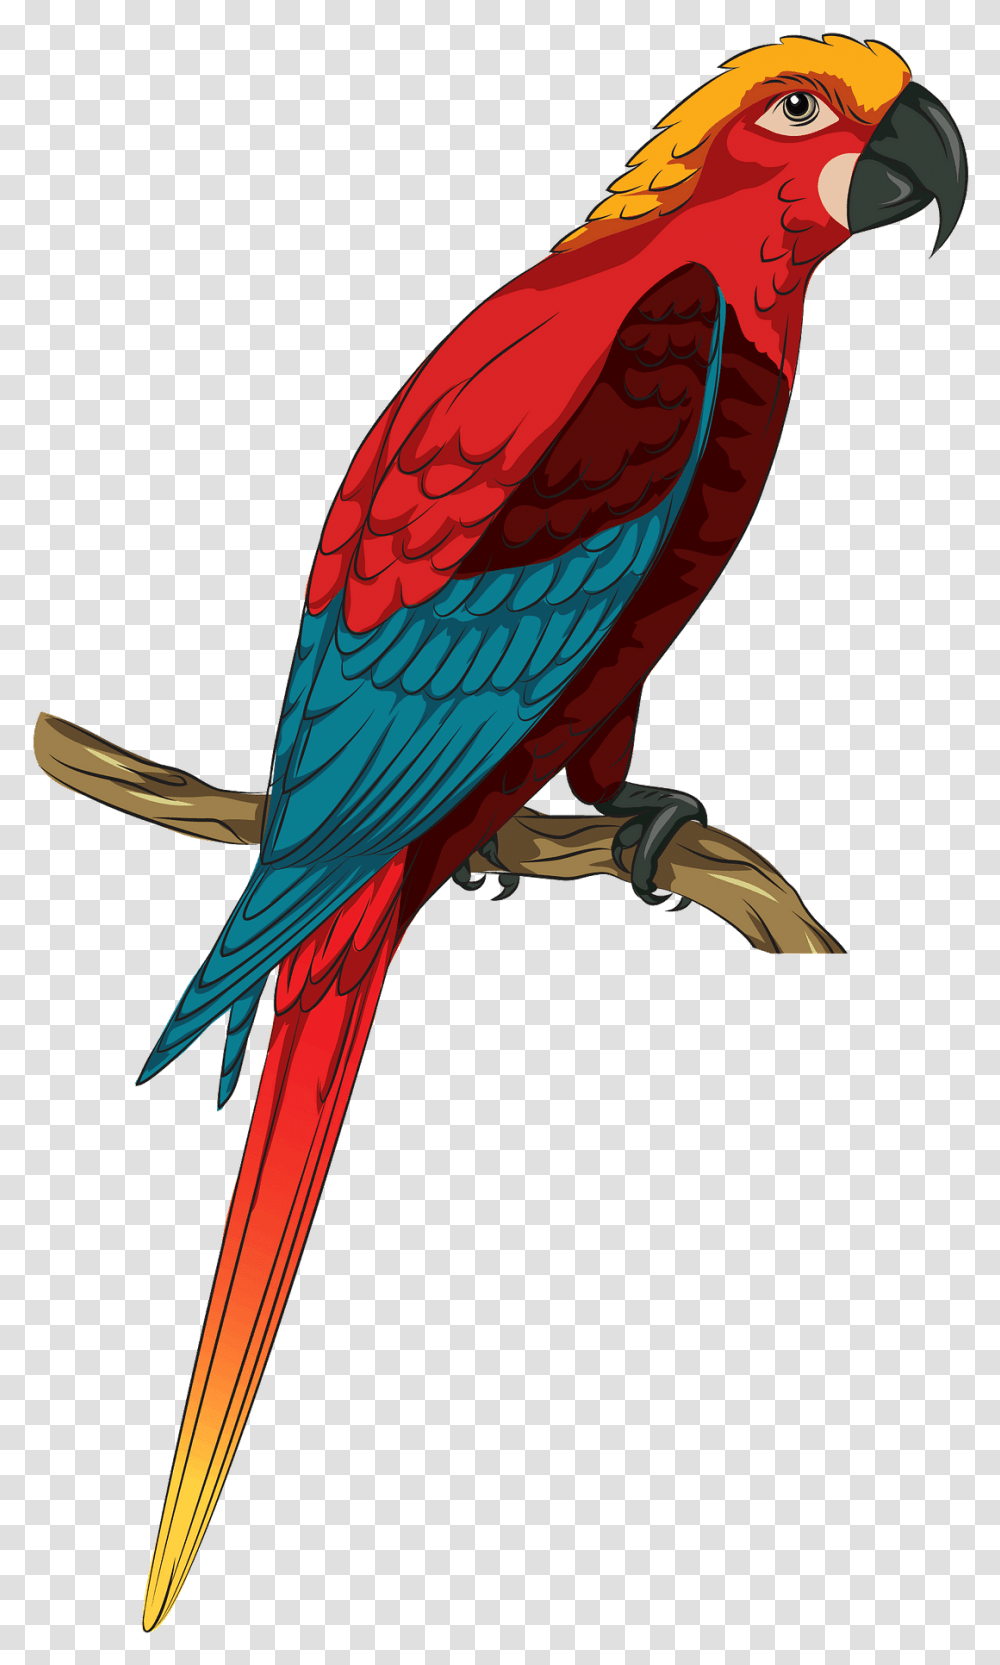 Jamaican Red Macaw Clipart Free Download Bird Glass Etching Colouring, Animal, Parrot Transparent Png